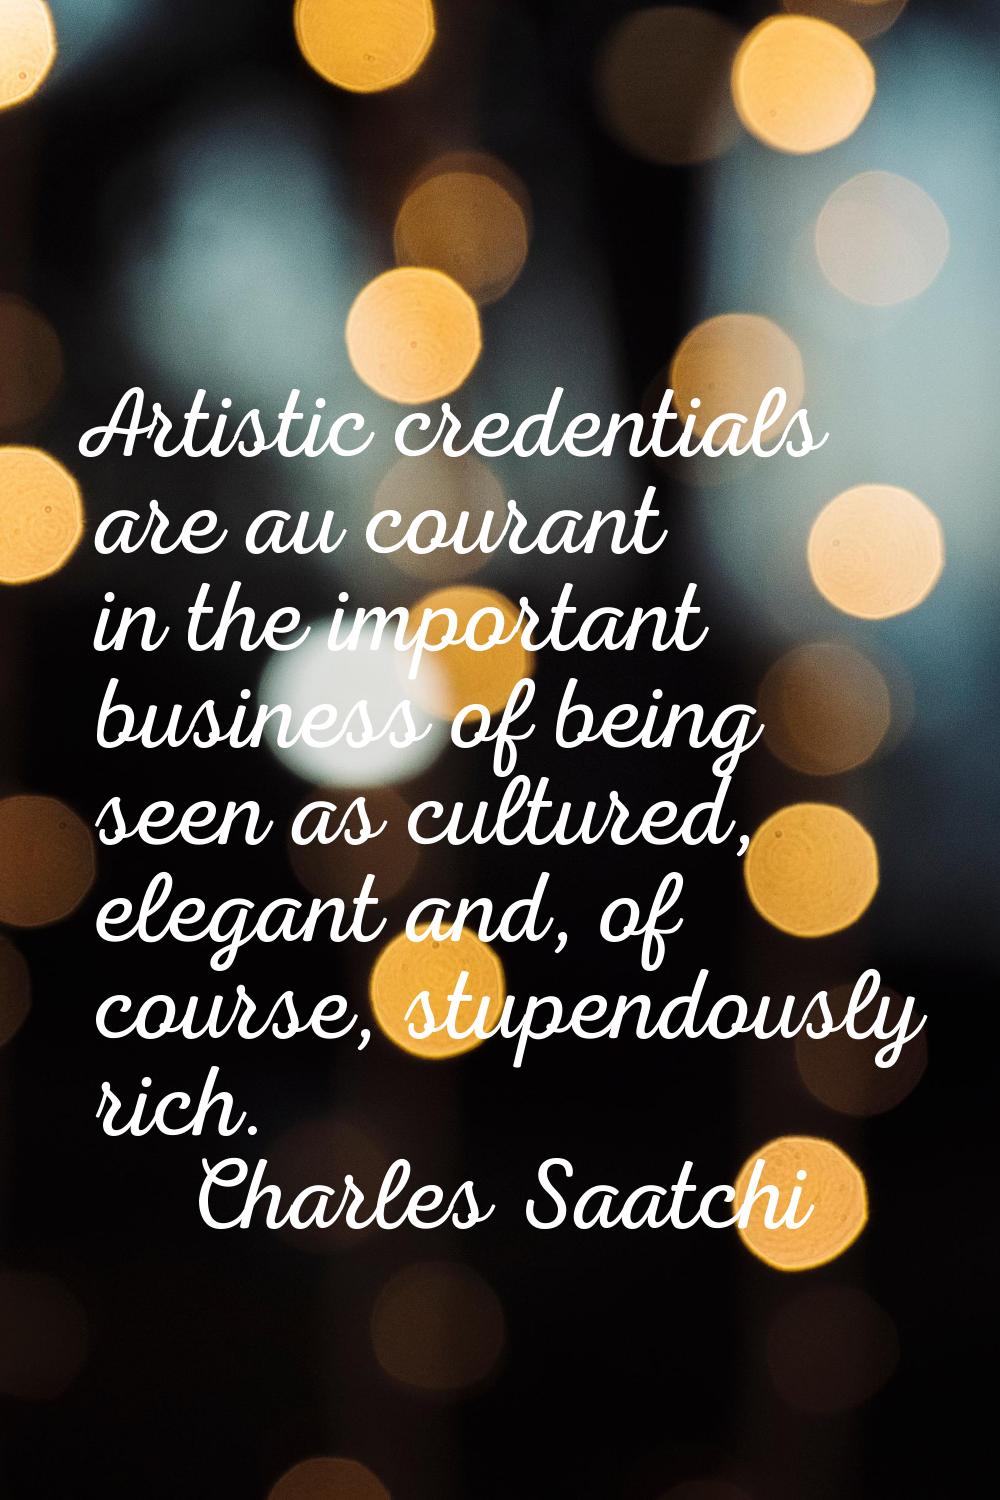 Artistic credentials are au courant in the important business of being seen as cultured, elegant an